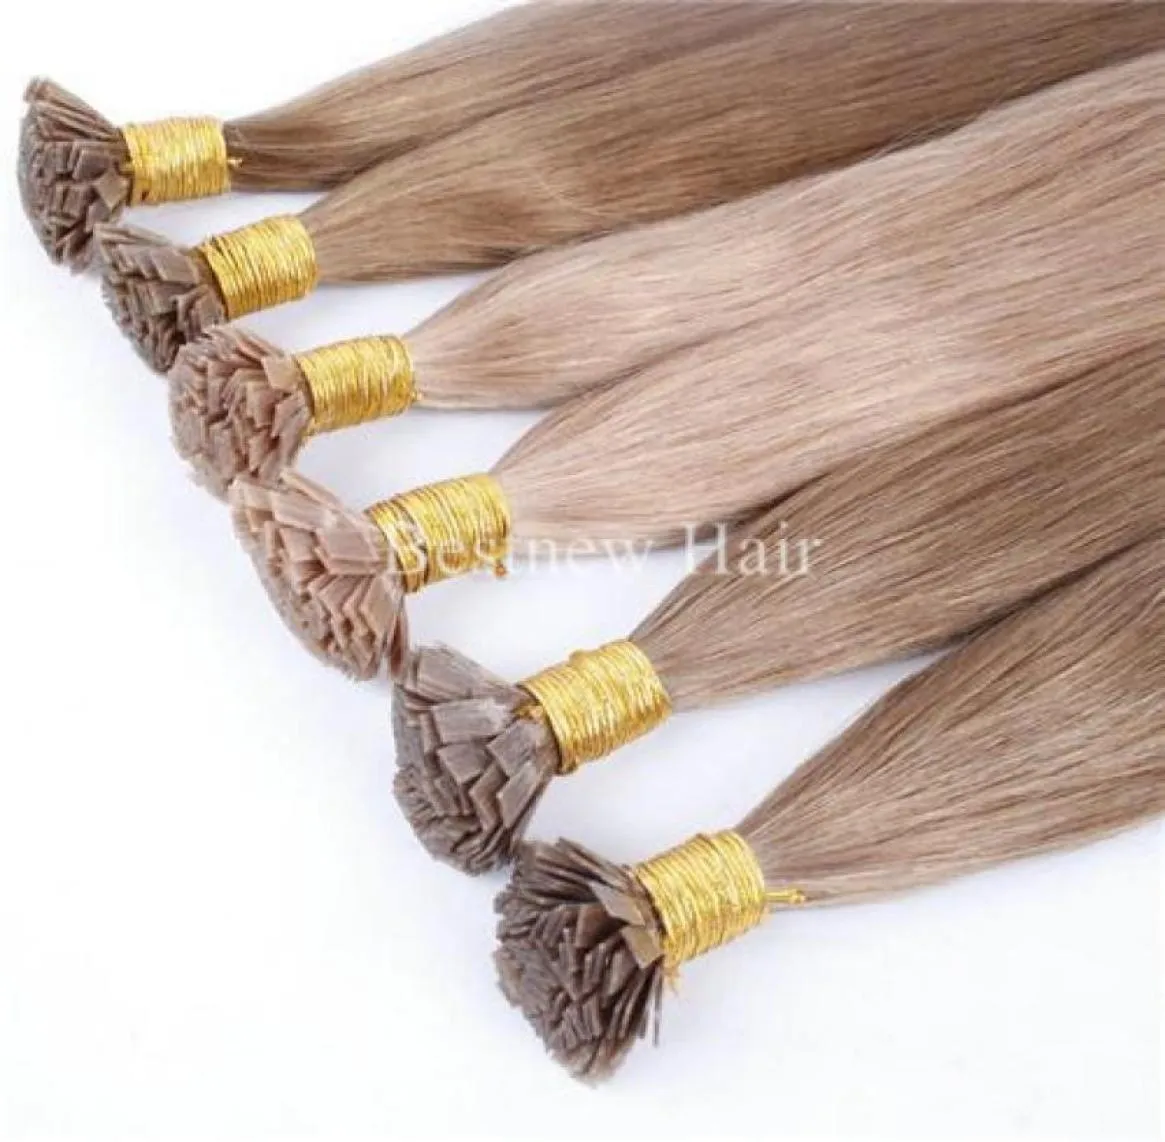 LUMMY Keratin Flat Tip Hair Pre bonded Hair Extensions 100g 18quot20quot22quot 1gs INDIAN REMY Flat Tip Hair Extensioon9421076